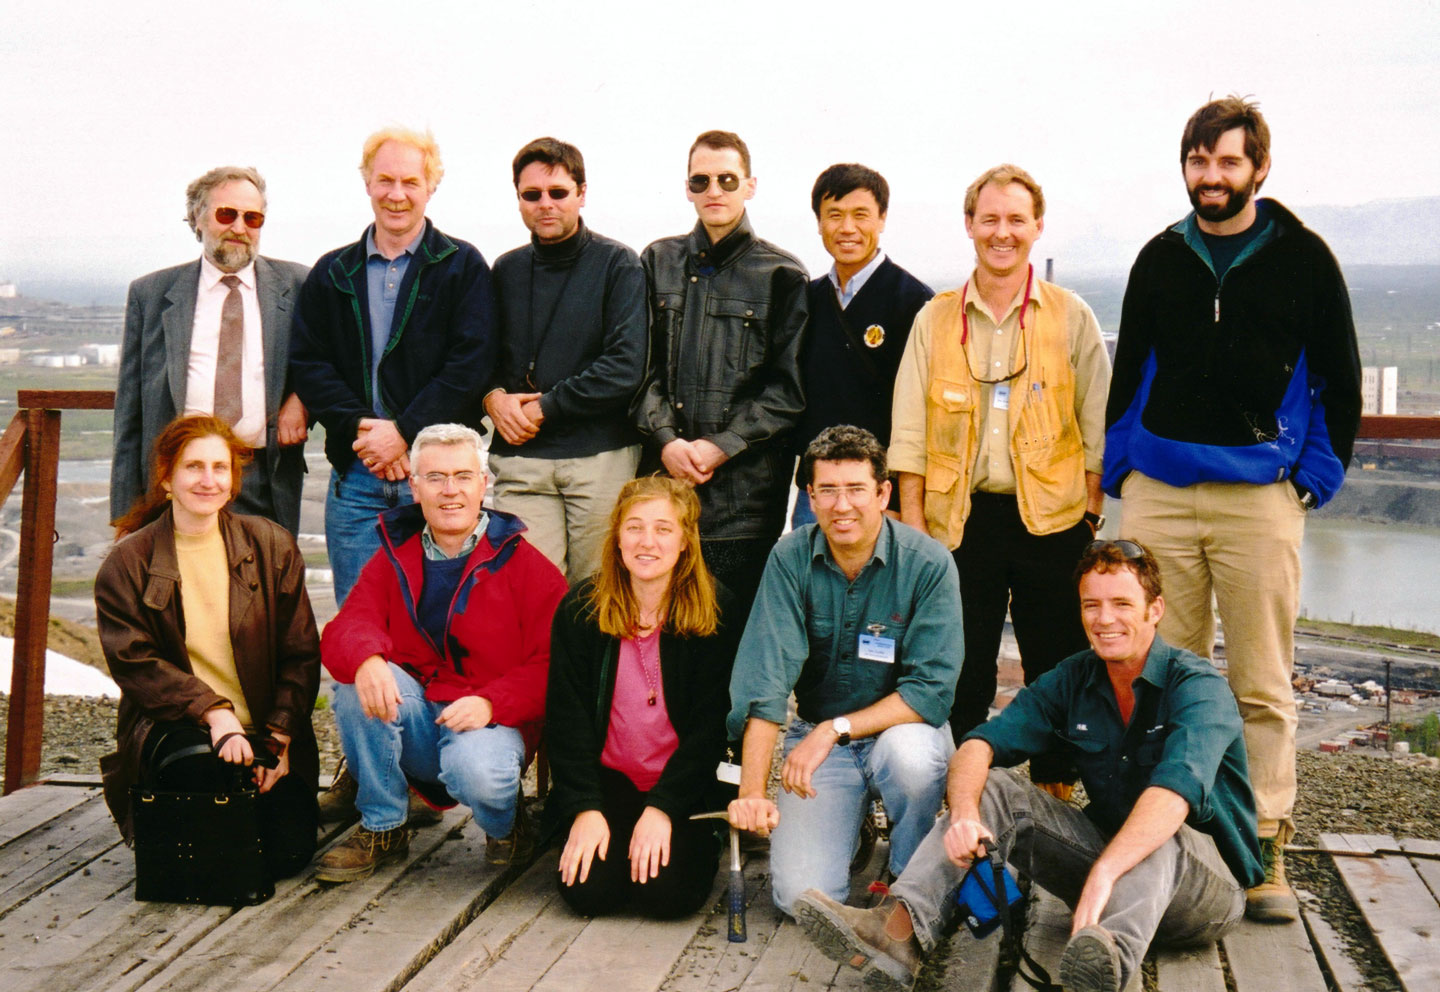 The Module 3 Group at Talnakh, Siberia, Russia